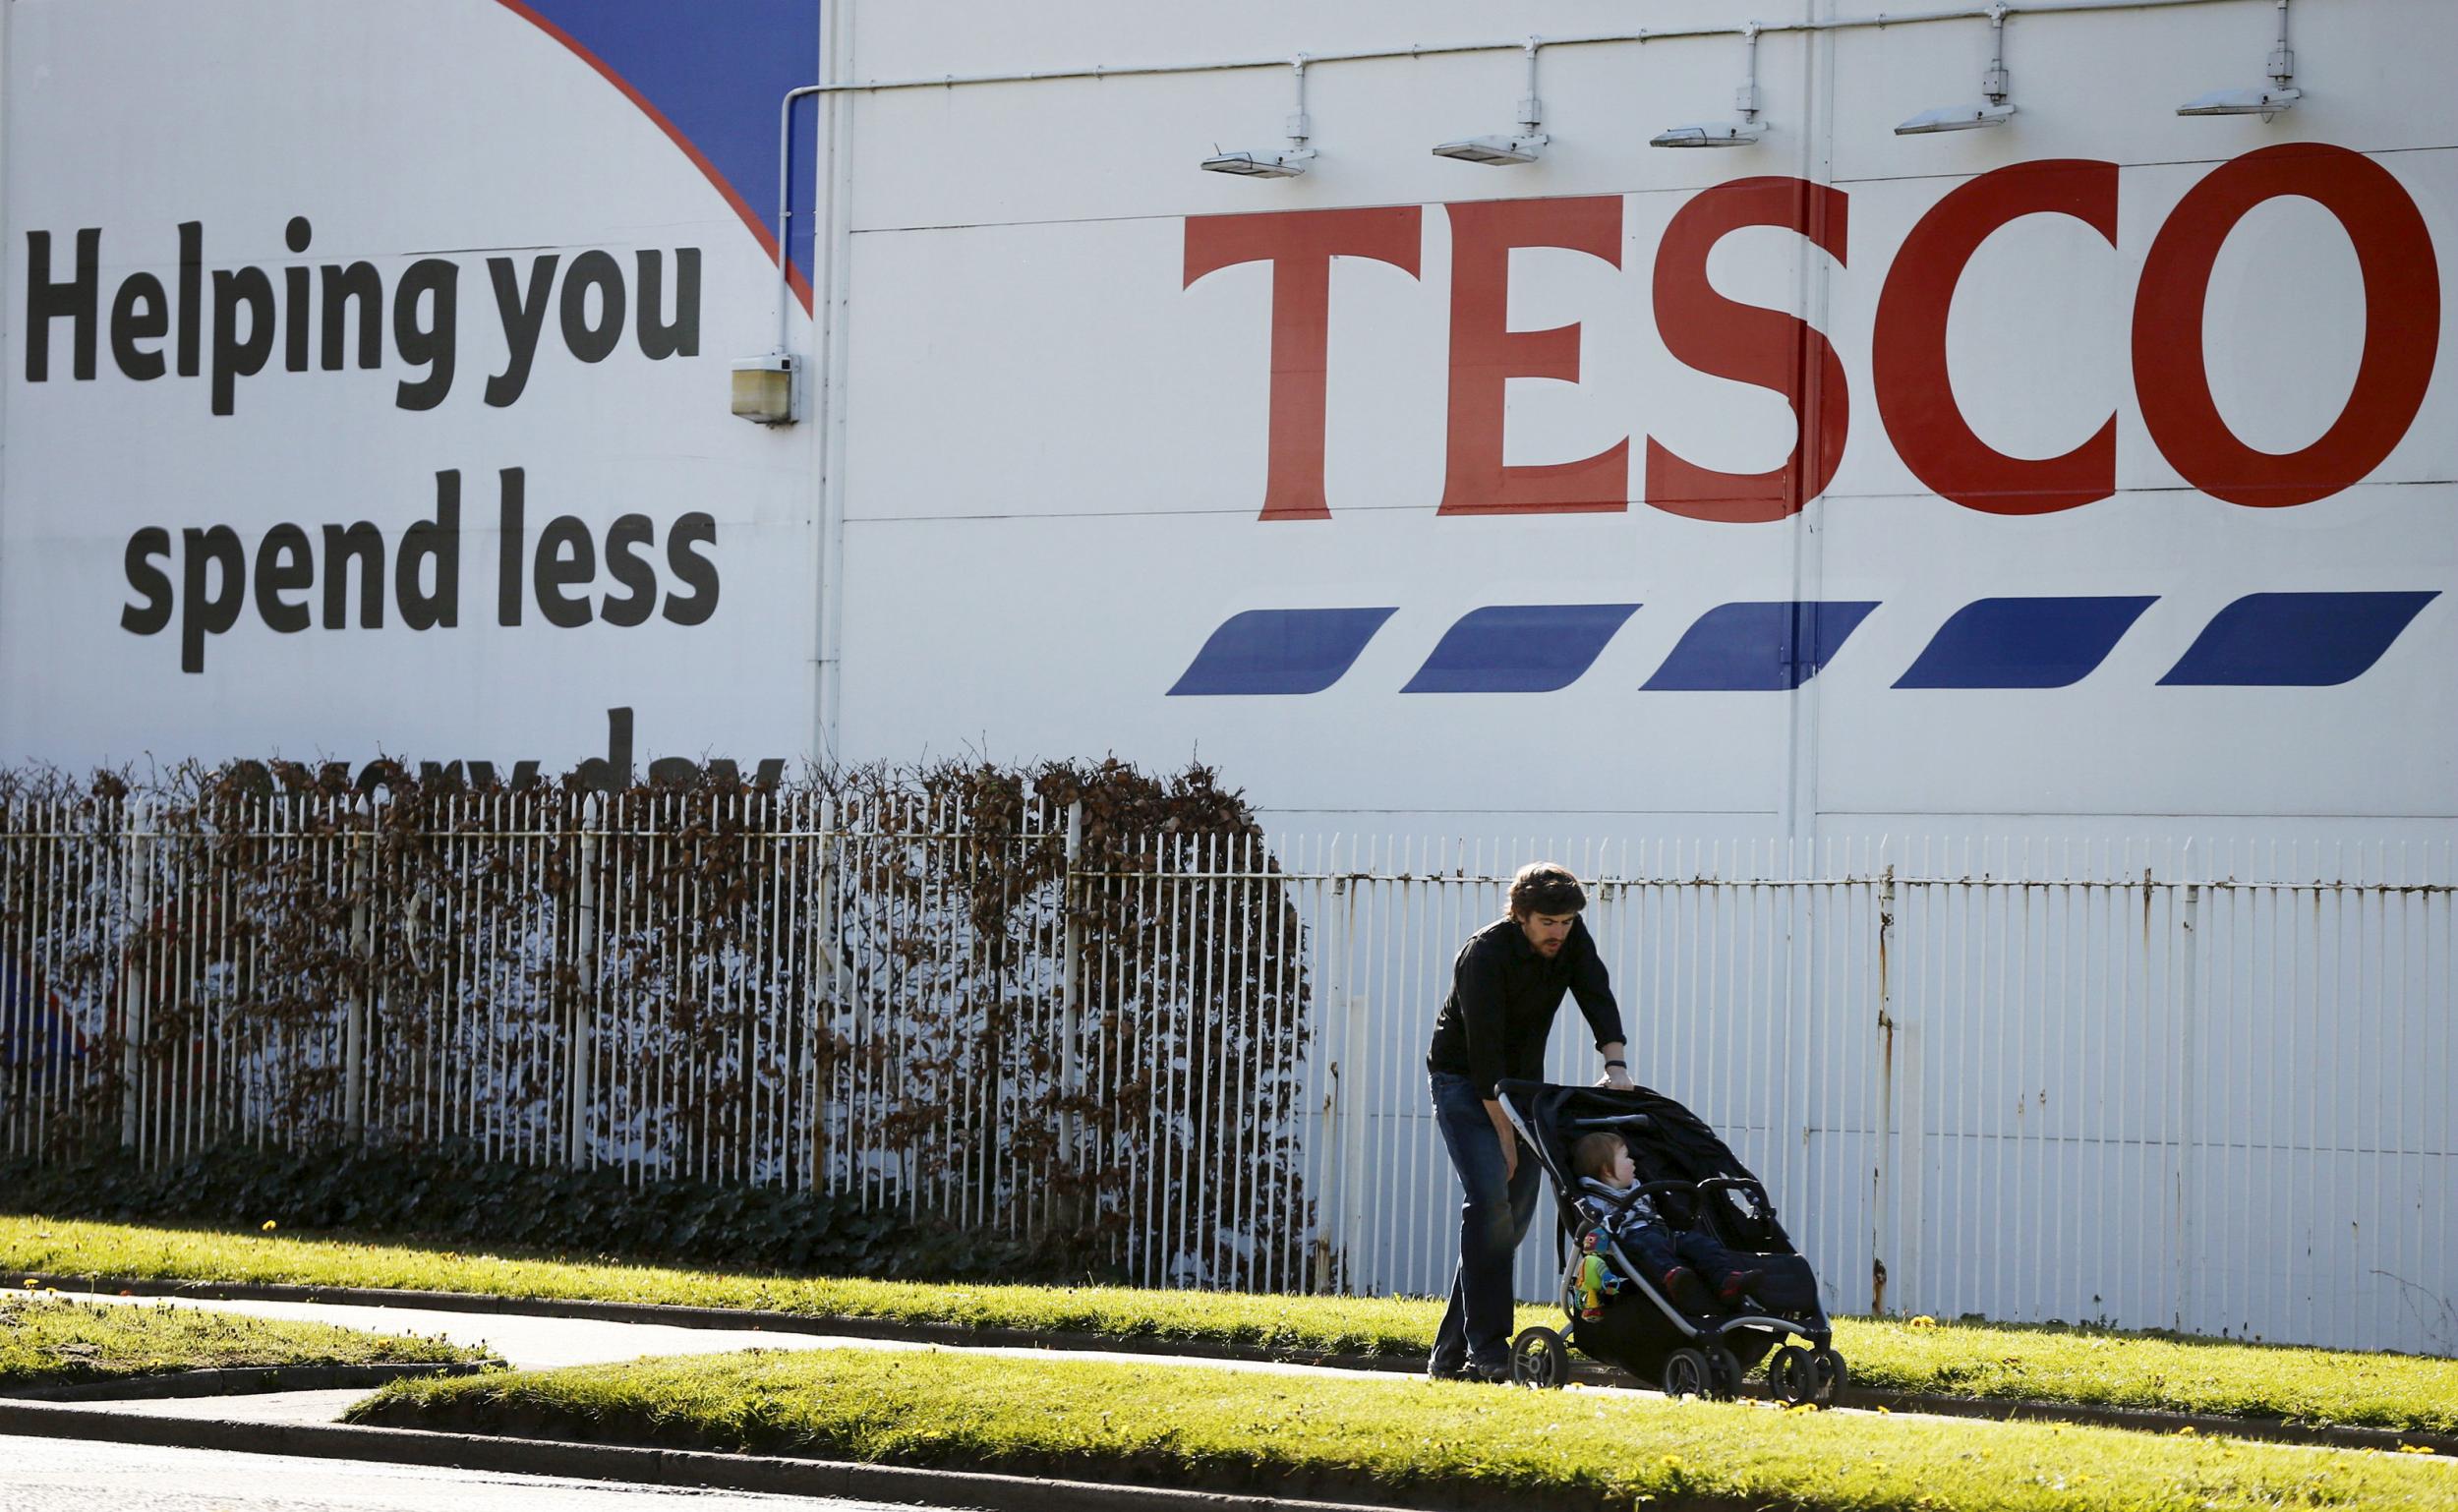 Tesco is the leading UK grocer with a 30 per cent share of the market, but Aldi and Lidl have rapidly gained ground